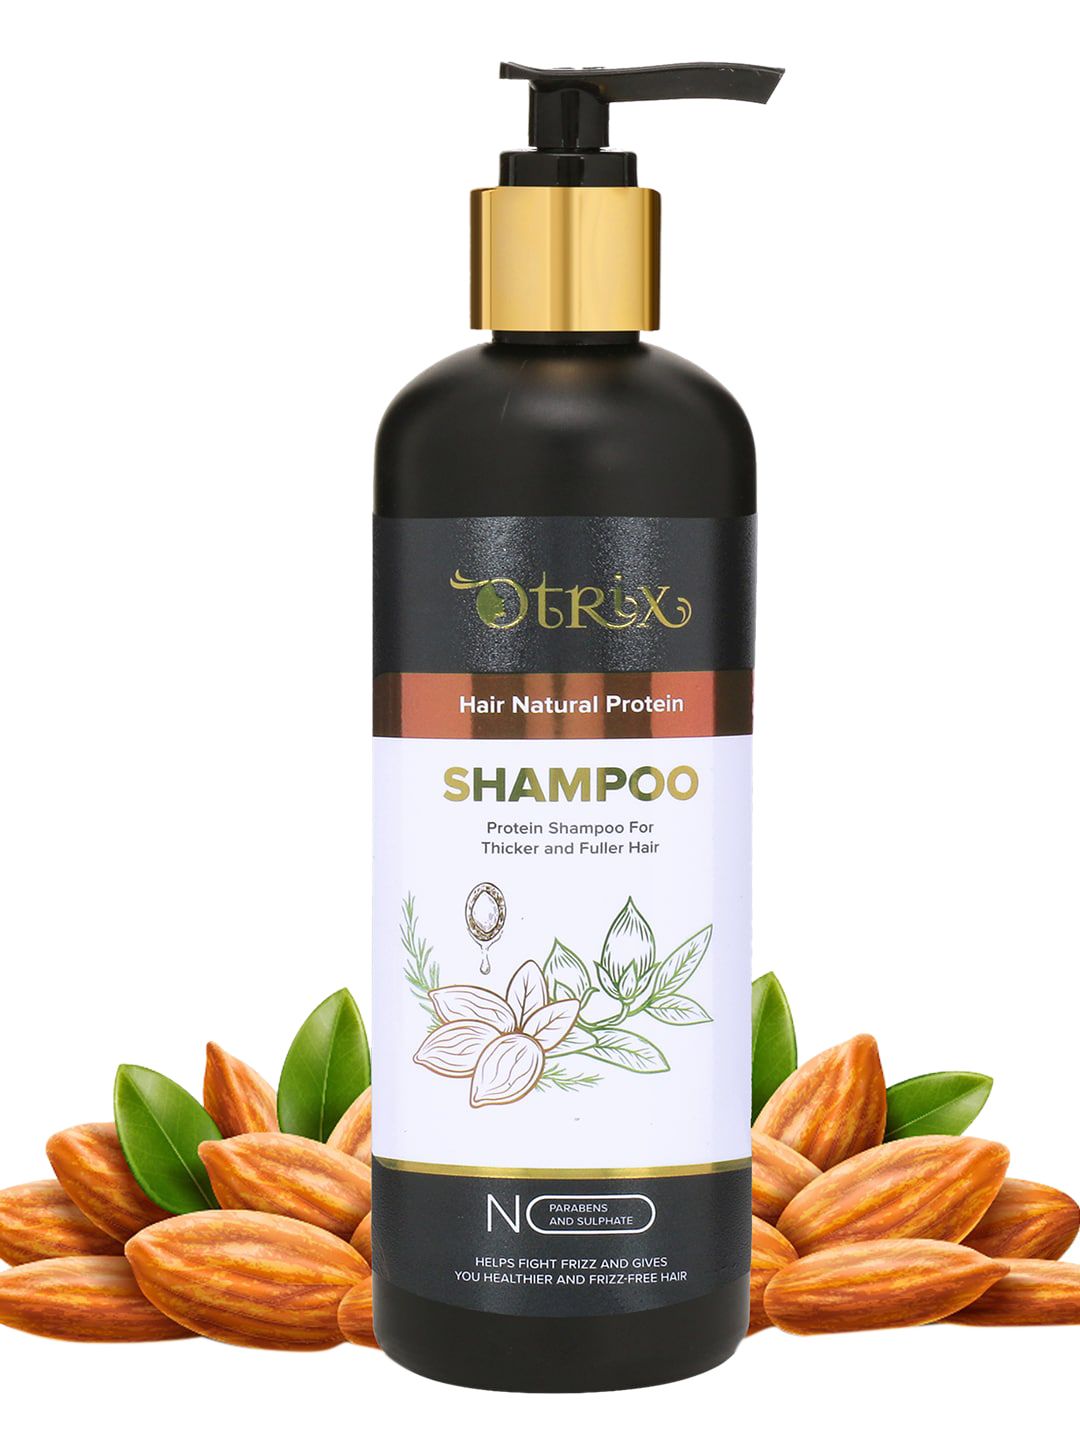 Otrix Hair Natural Protein Shampoo with Argan OIl for Thicker & Fuller Hair - 300ml Price in India